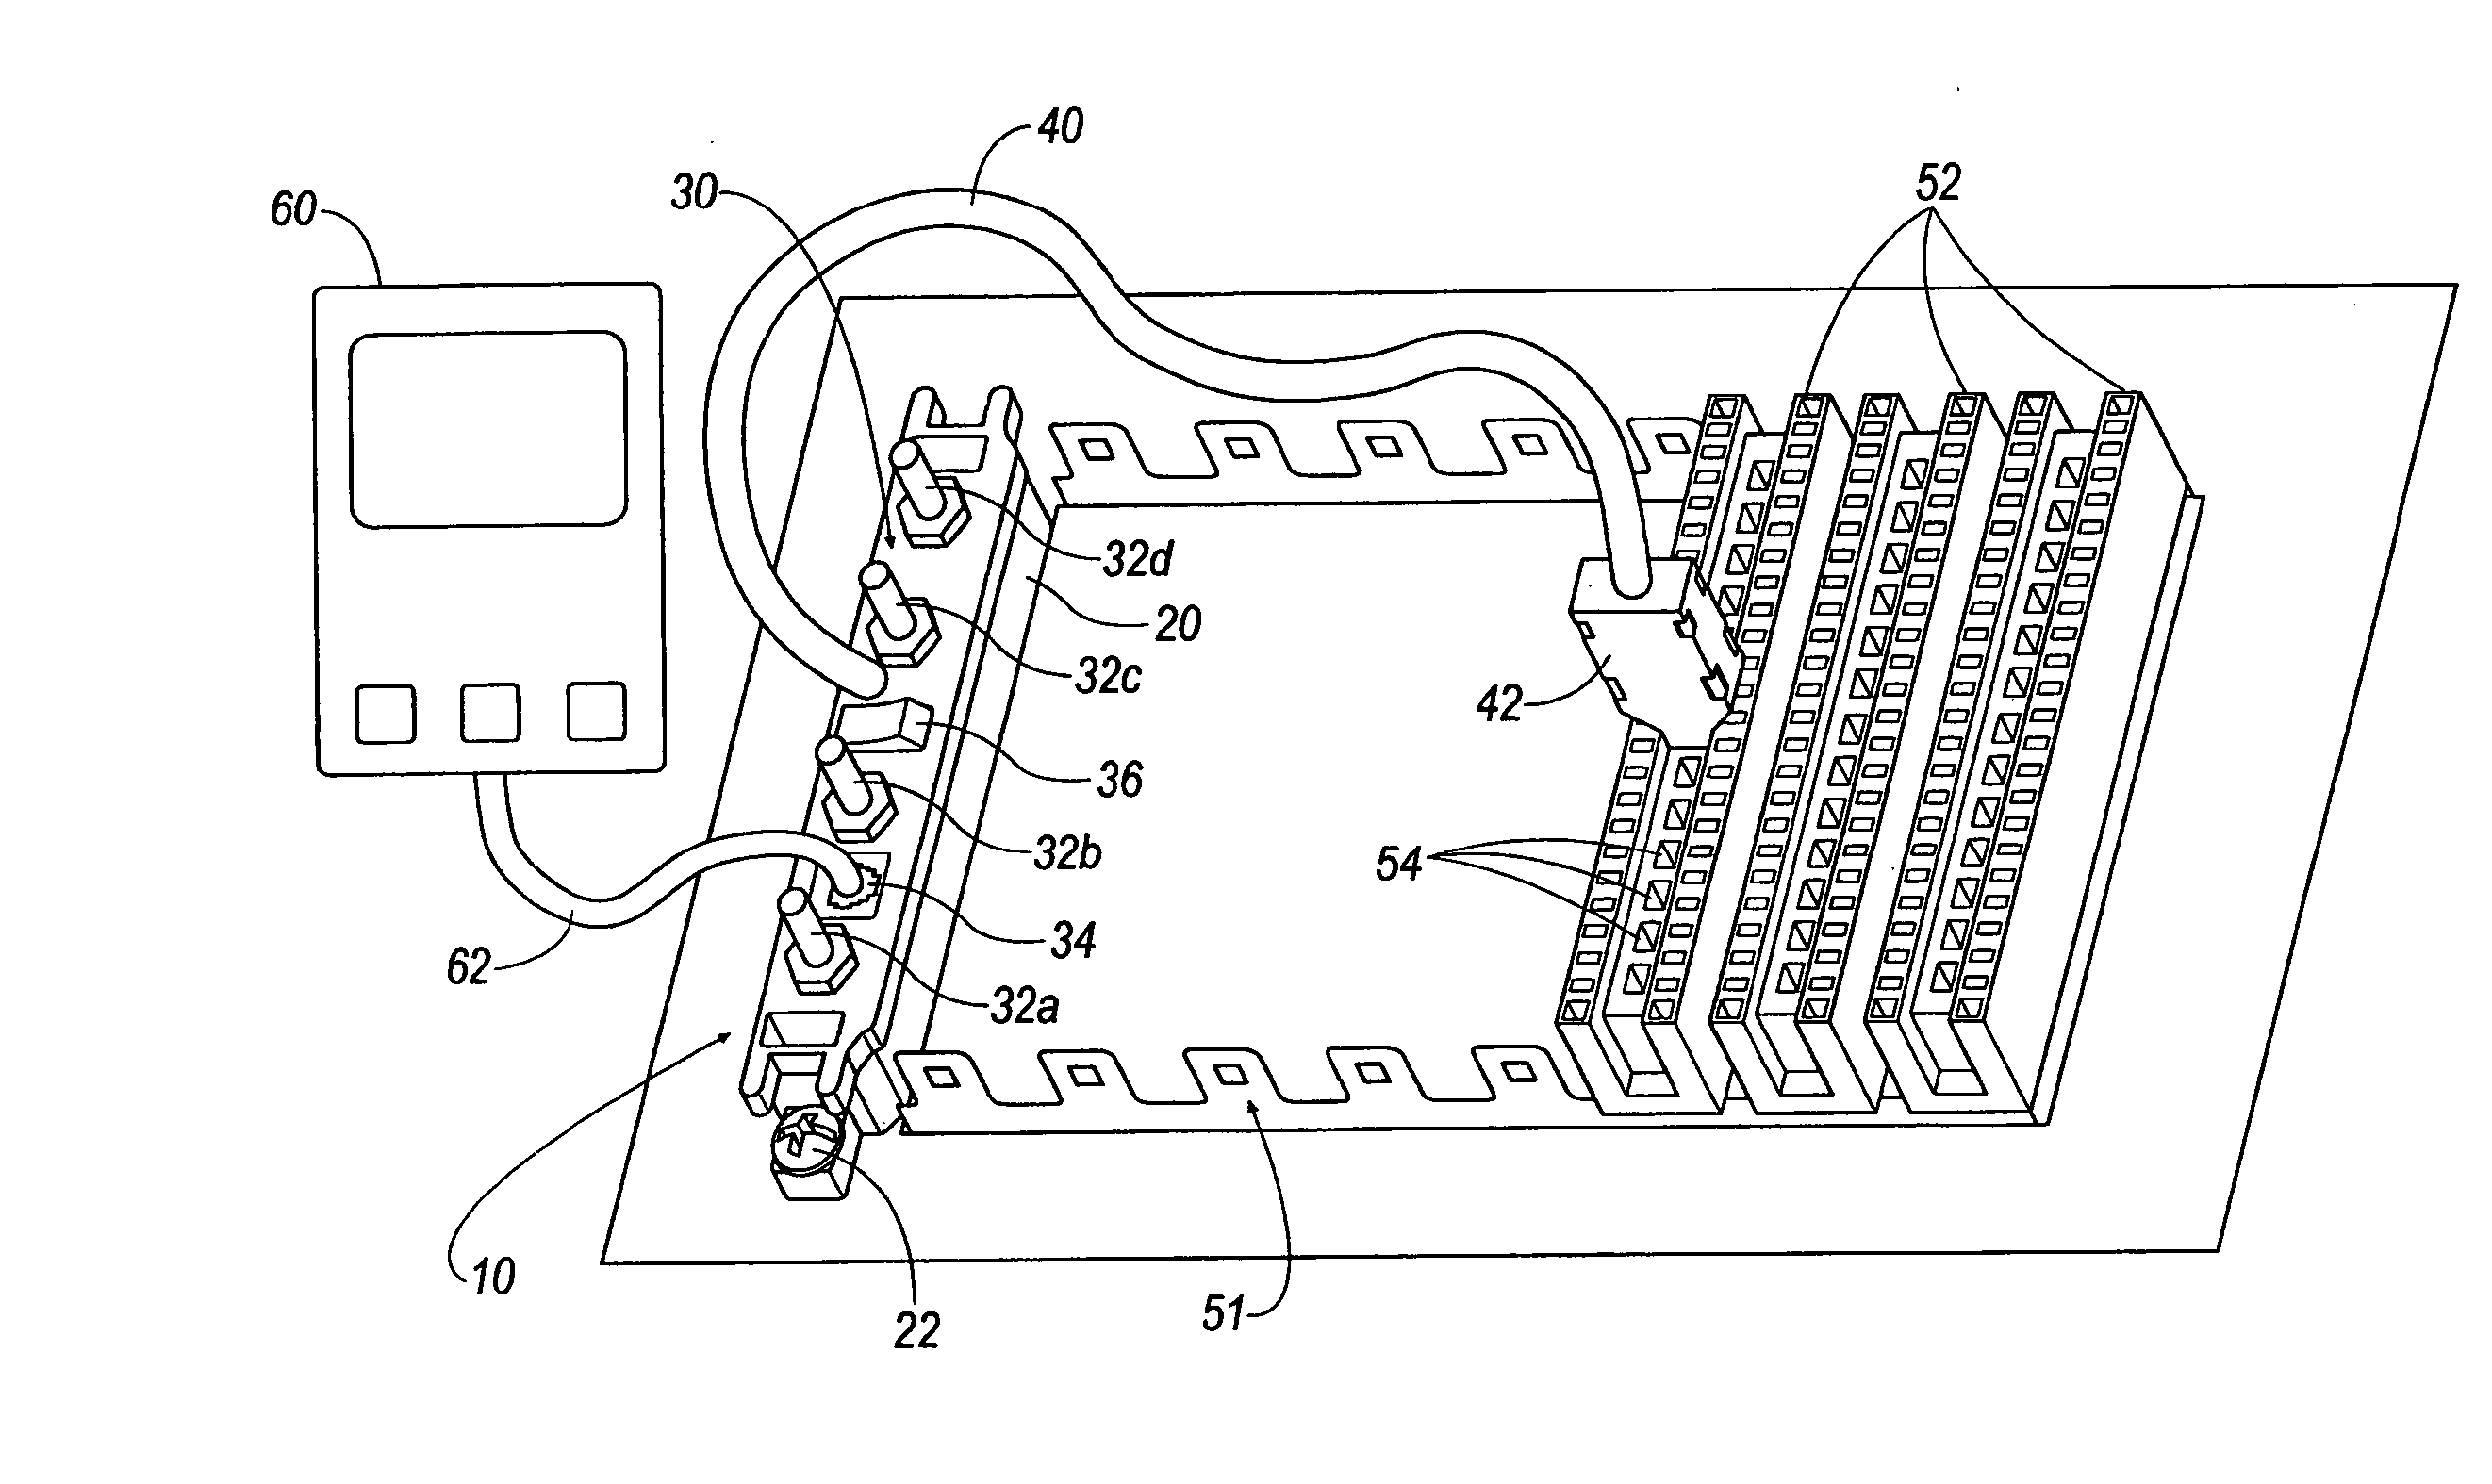 Interface device for testing a telecommunication circuit